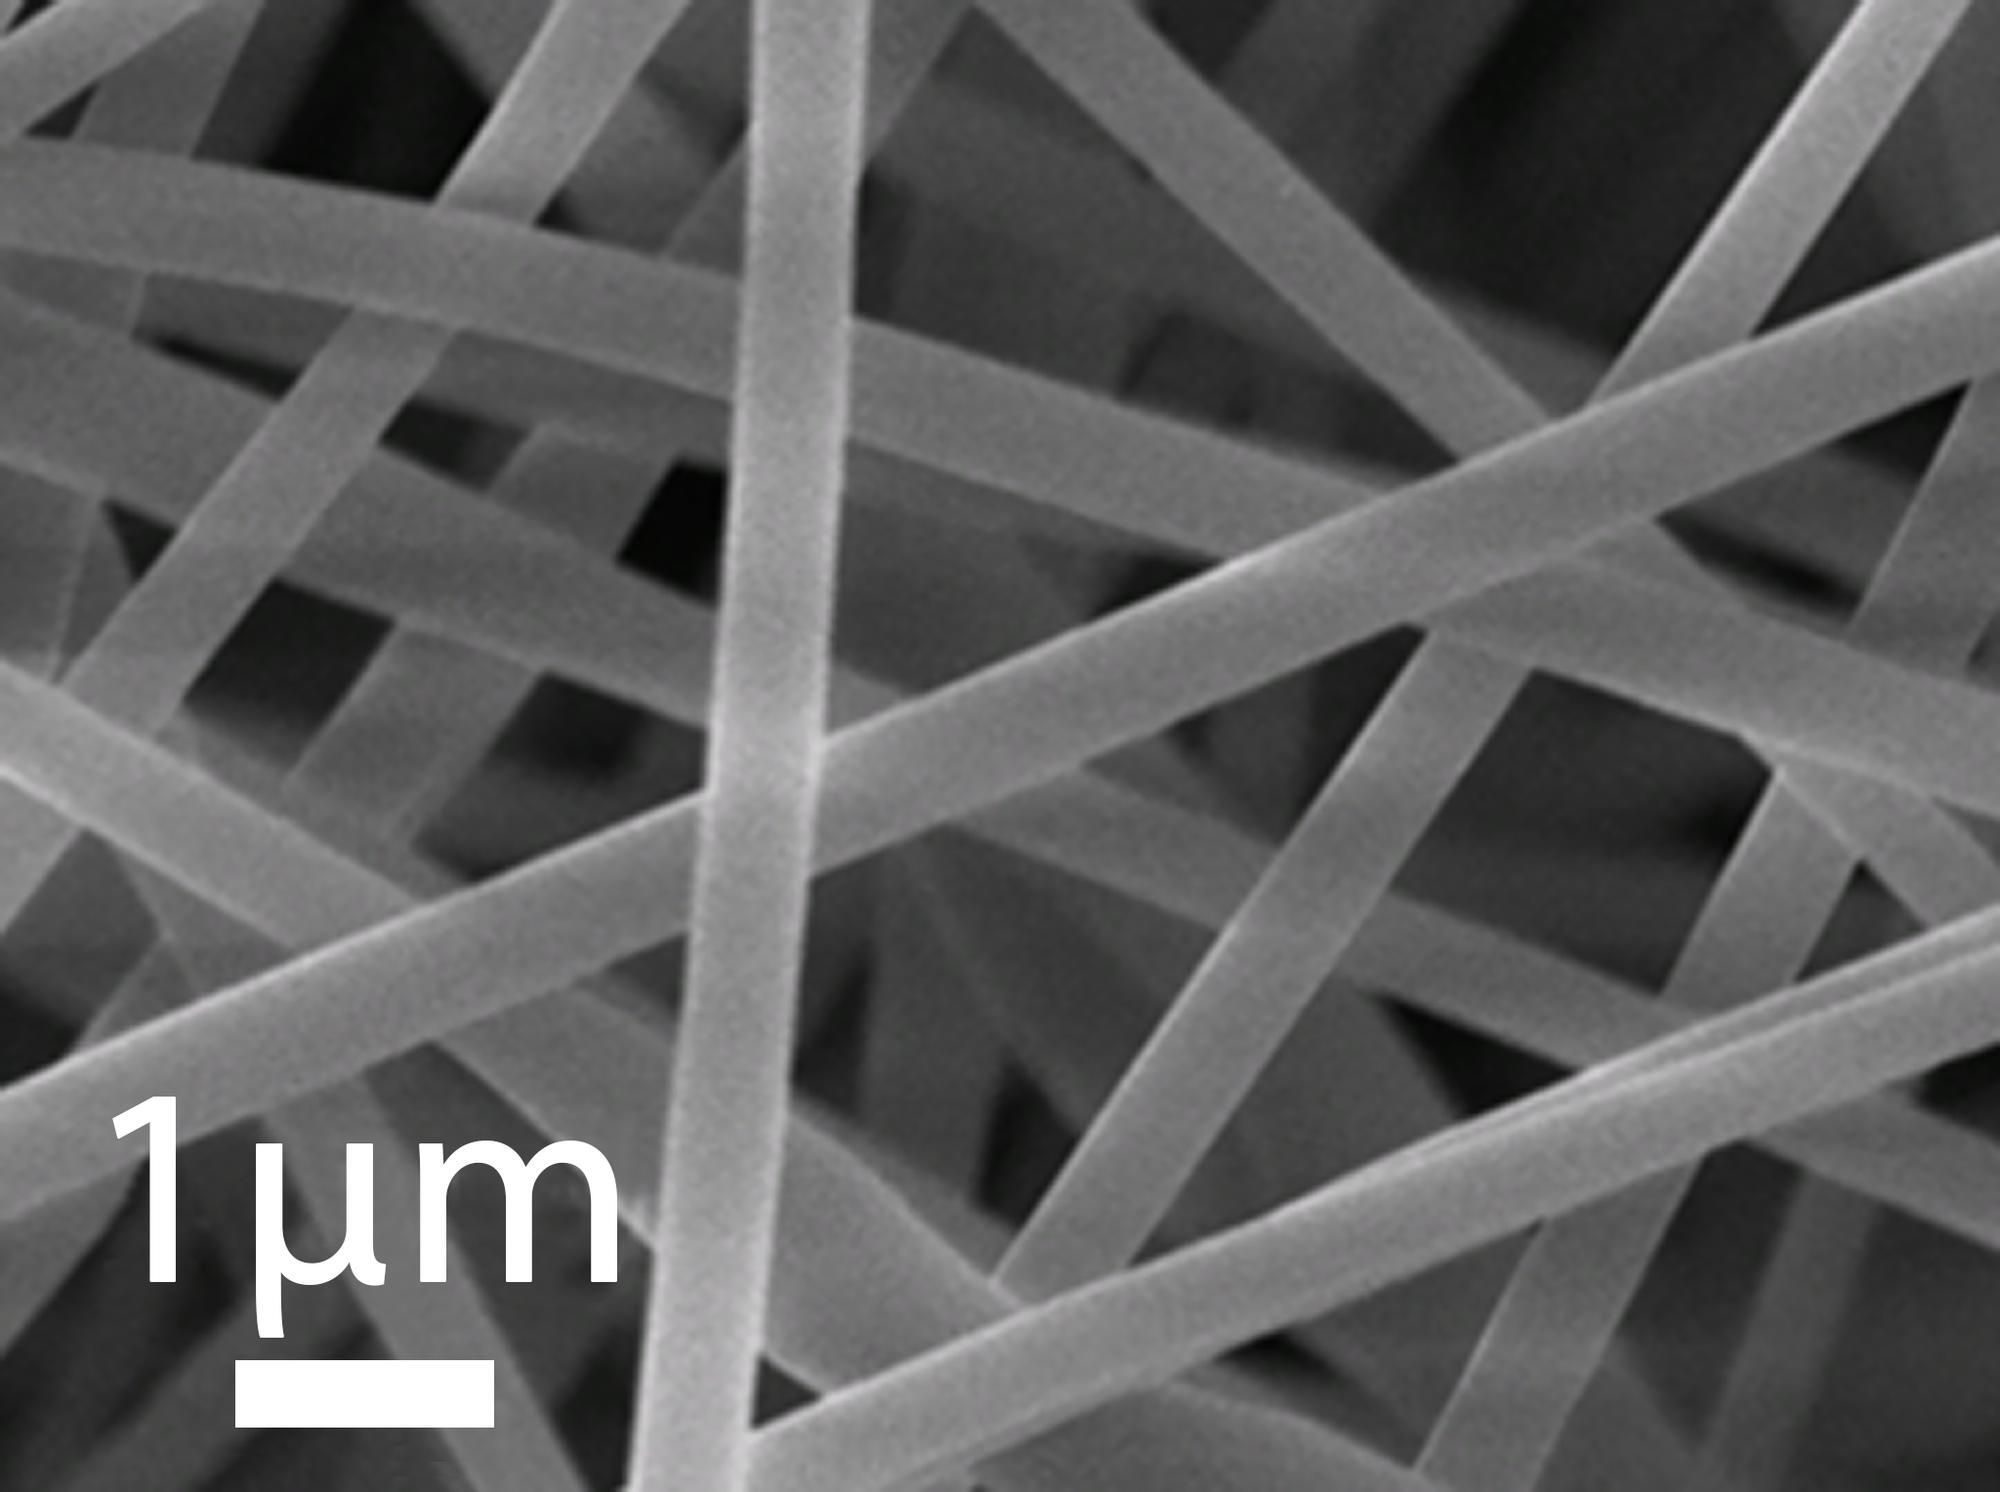 The microstructure of the super-cooling nanofiber captured under a scanning electron microscope.